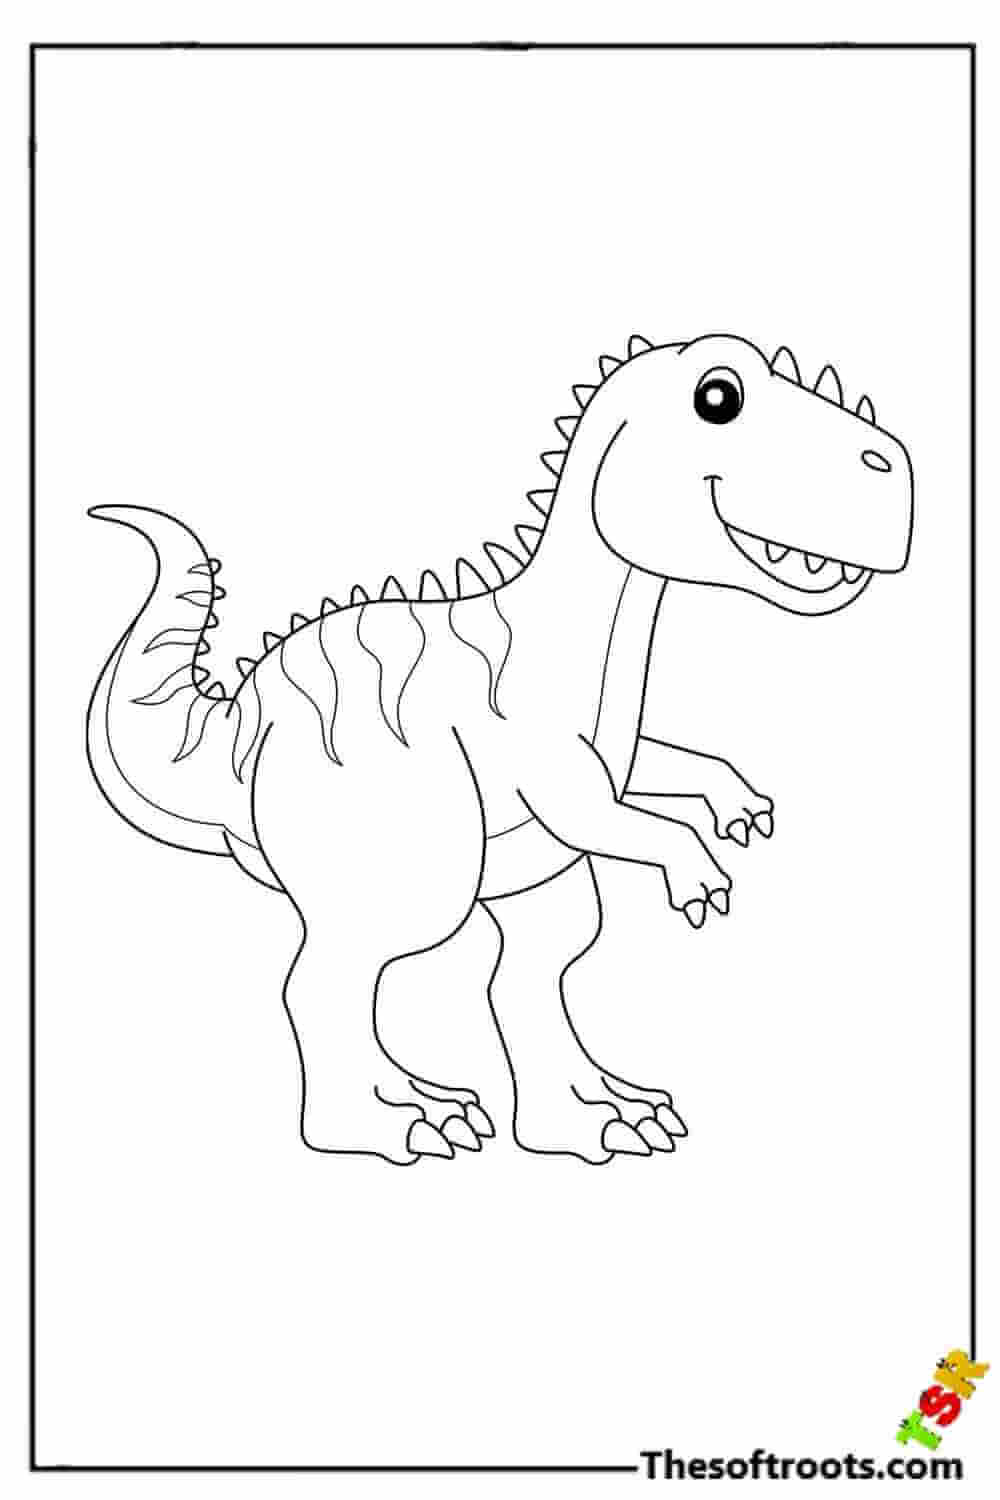 Giganotosaurus coloring pages